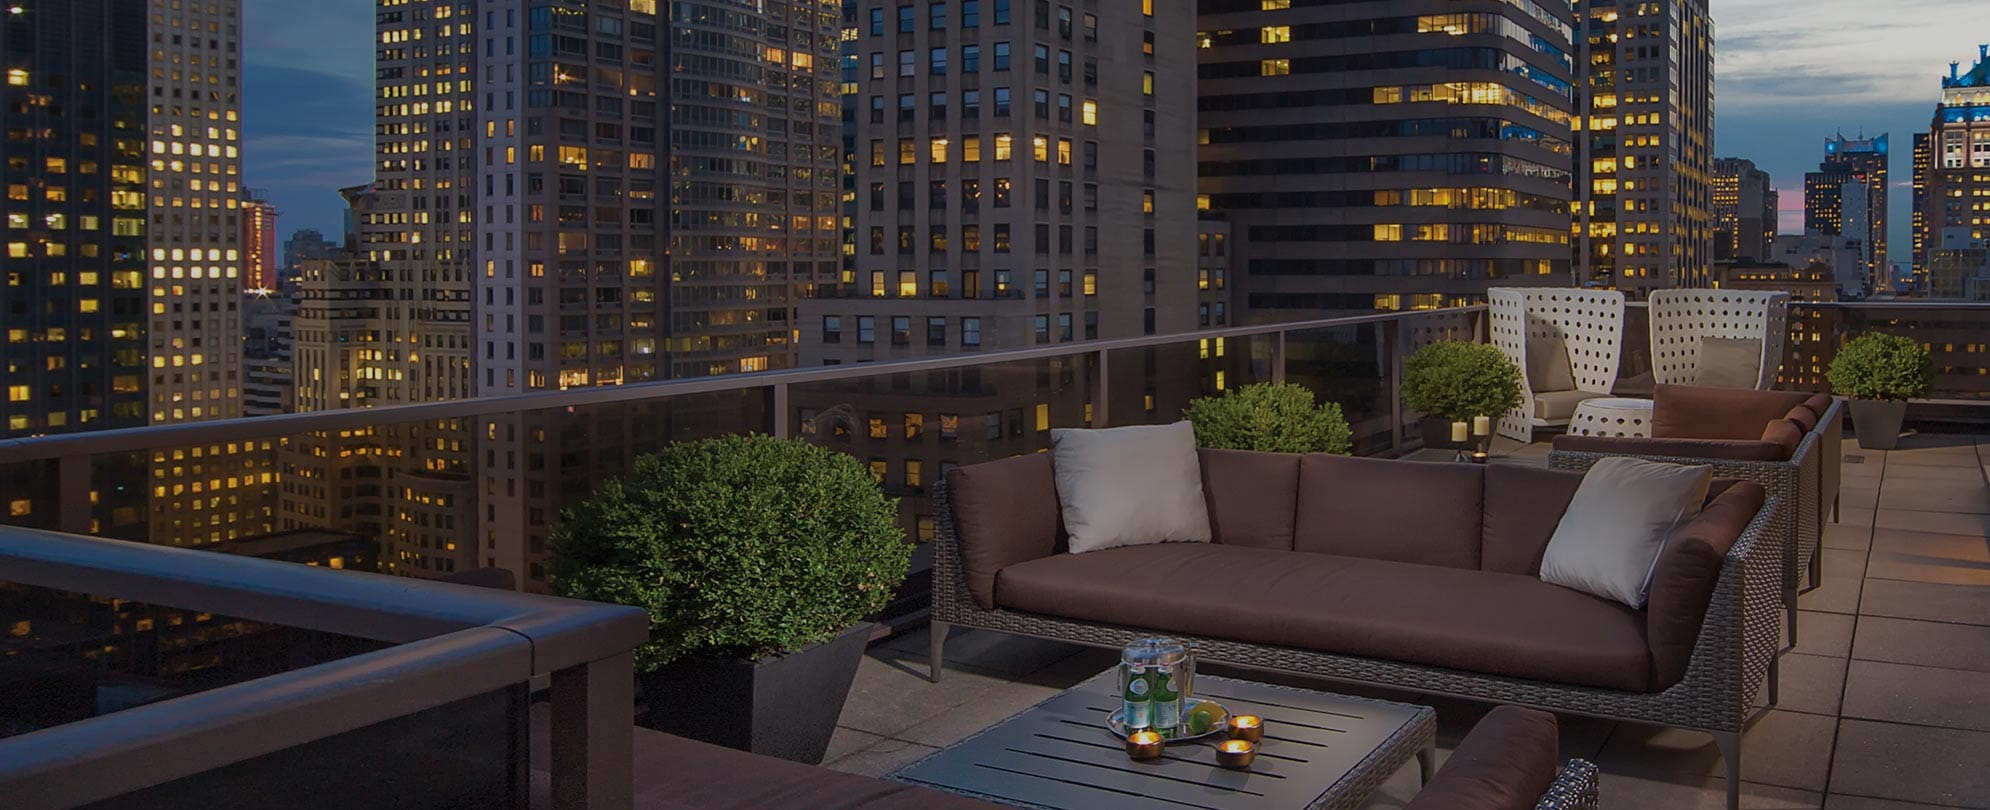 The rooftop deck with couches and chairs at Club Wyndham Midtown 45; New York City skyscrapers lit up in the background. 